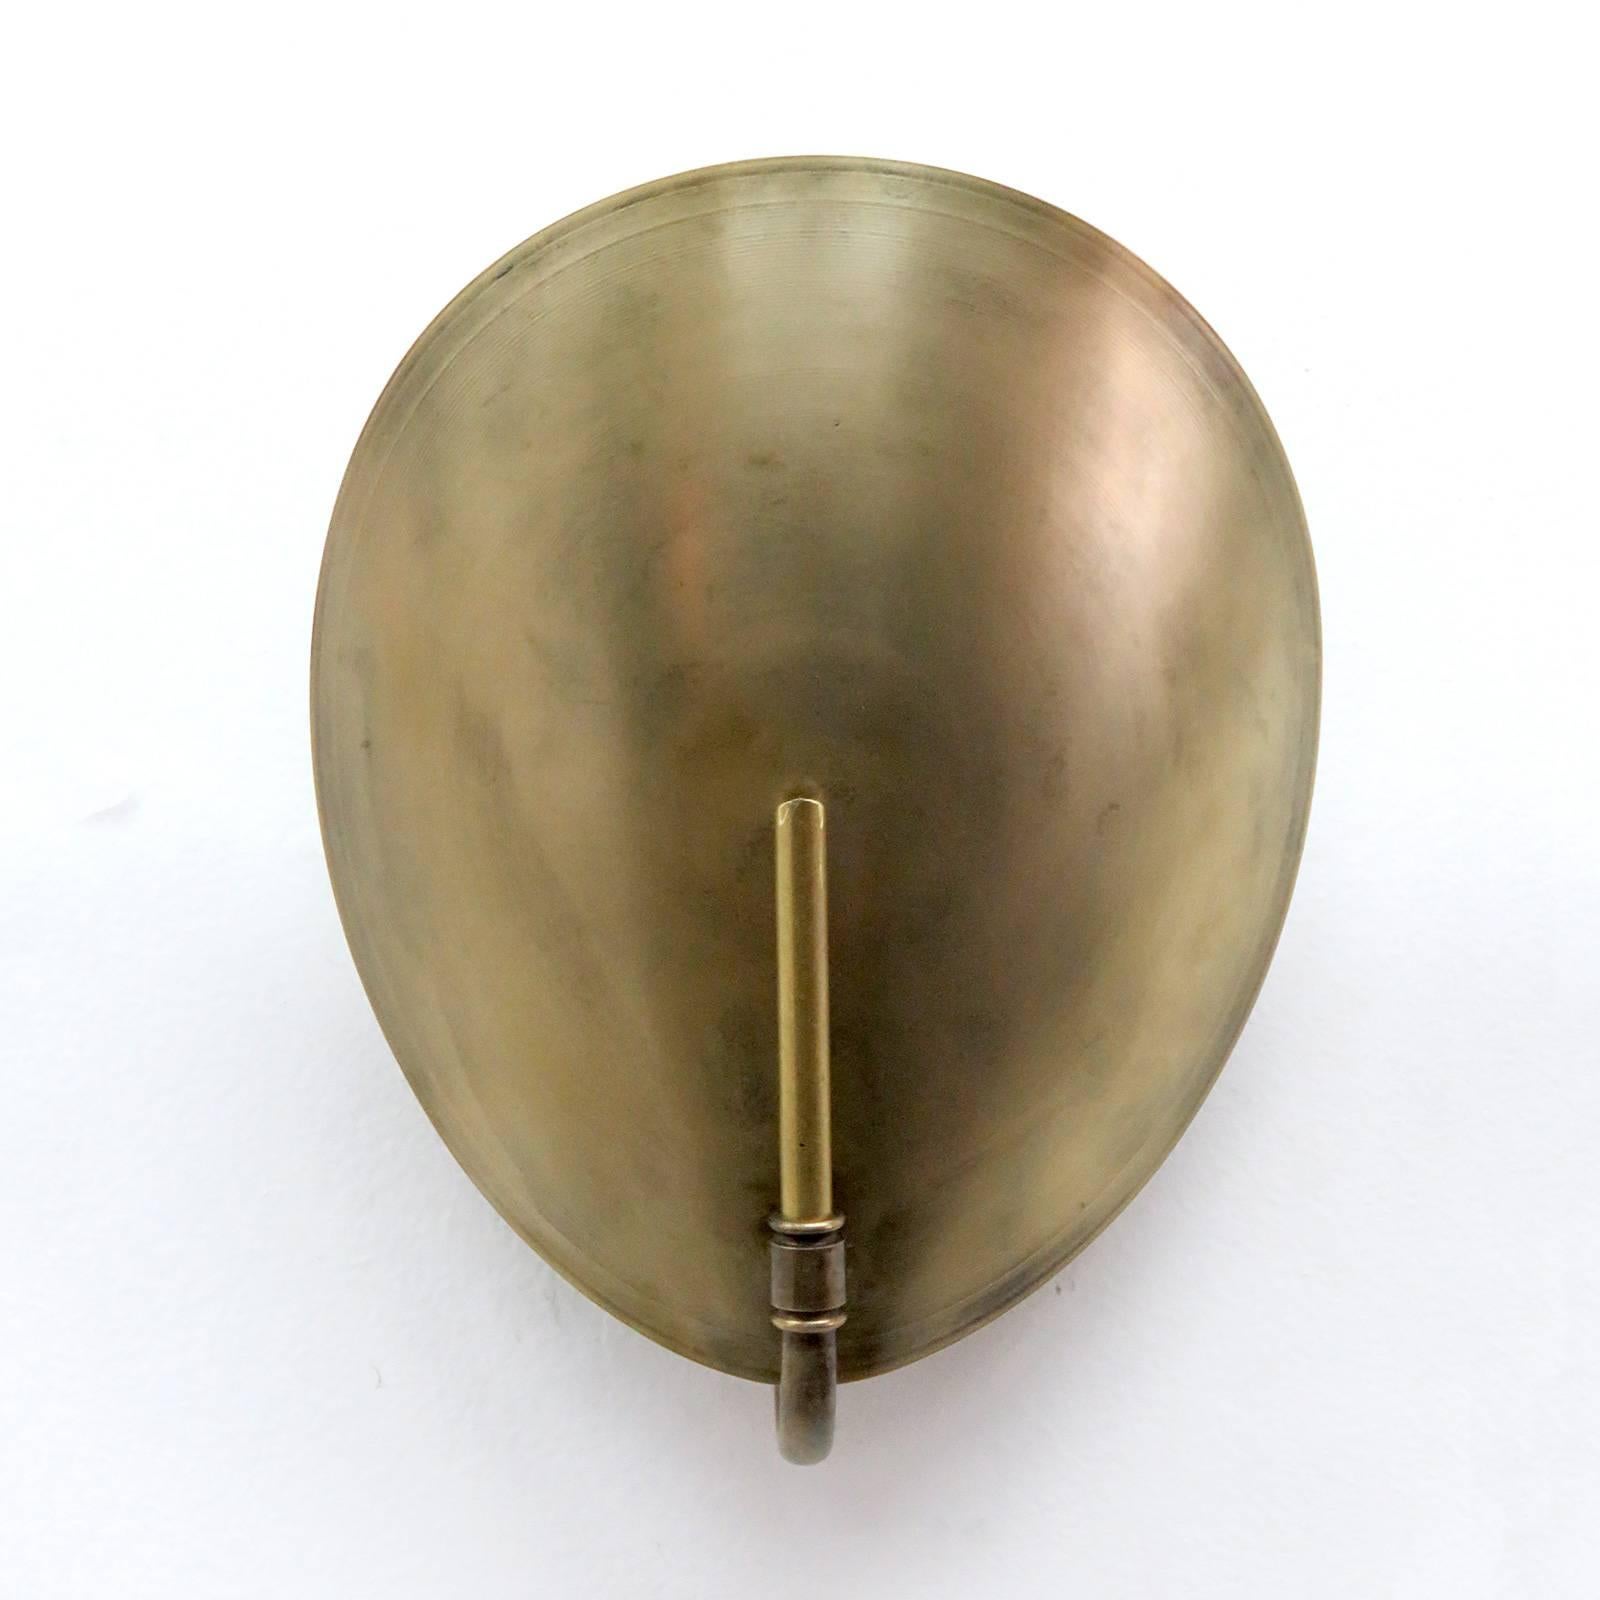 Wonderful small-scale, aged brass wall lights by Gallery L7, handcrafted and finished in Los Angeles from American brass, also available with individual on/off pull switch, one E26 socket per fixture, max. wattage 75w each  or LED equivalent, wired